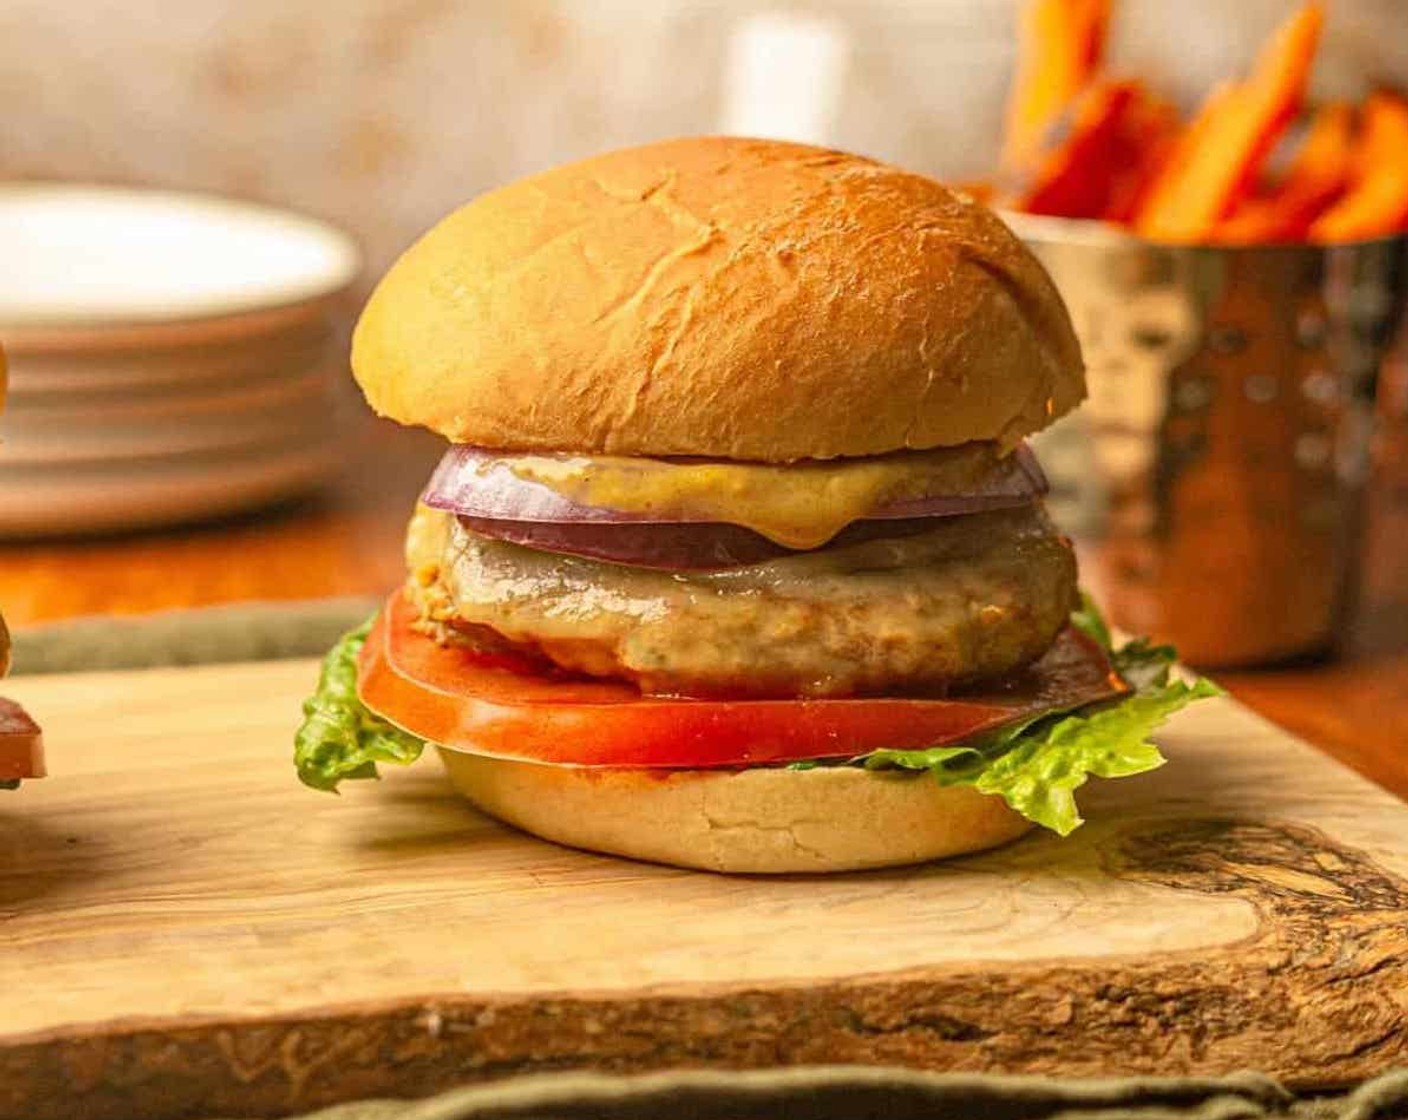 step 7 Serve the burgers warm on a toasted Hamburger Buns (4) with Lettuce (to taste), Tomatoes (4 slices), sliced red onion, or your favorite toppings.